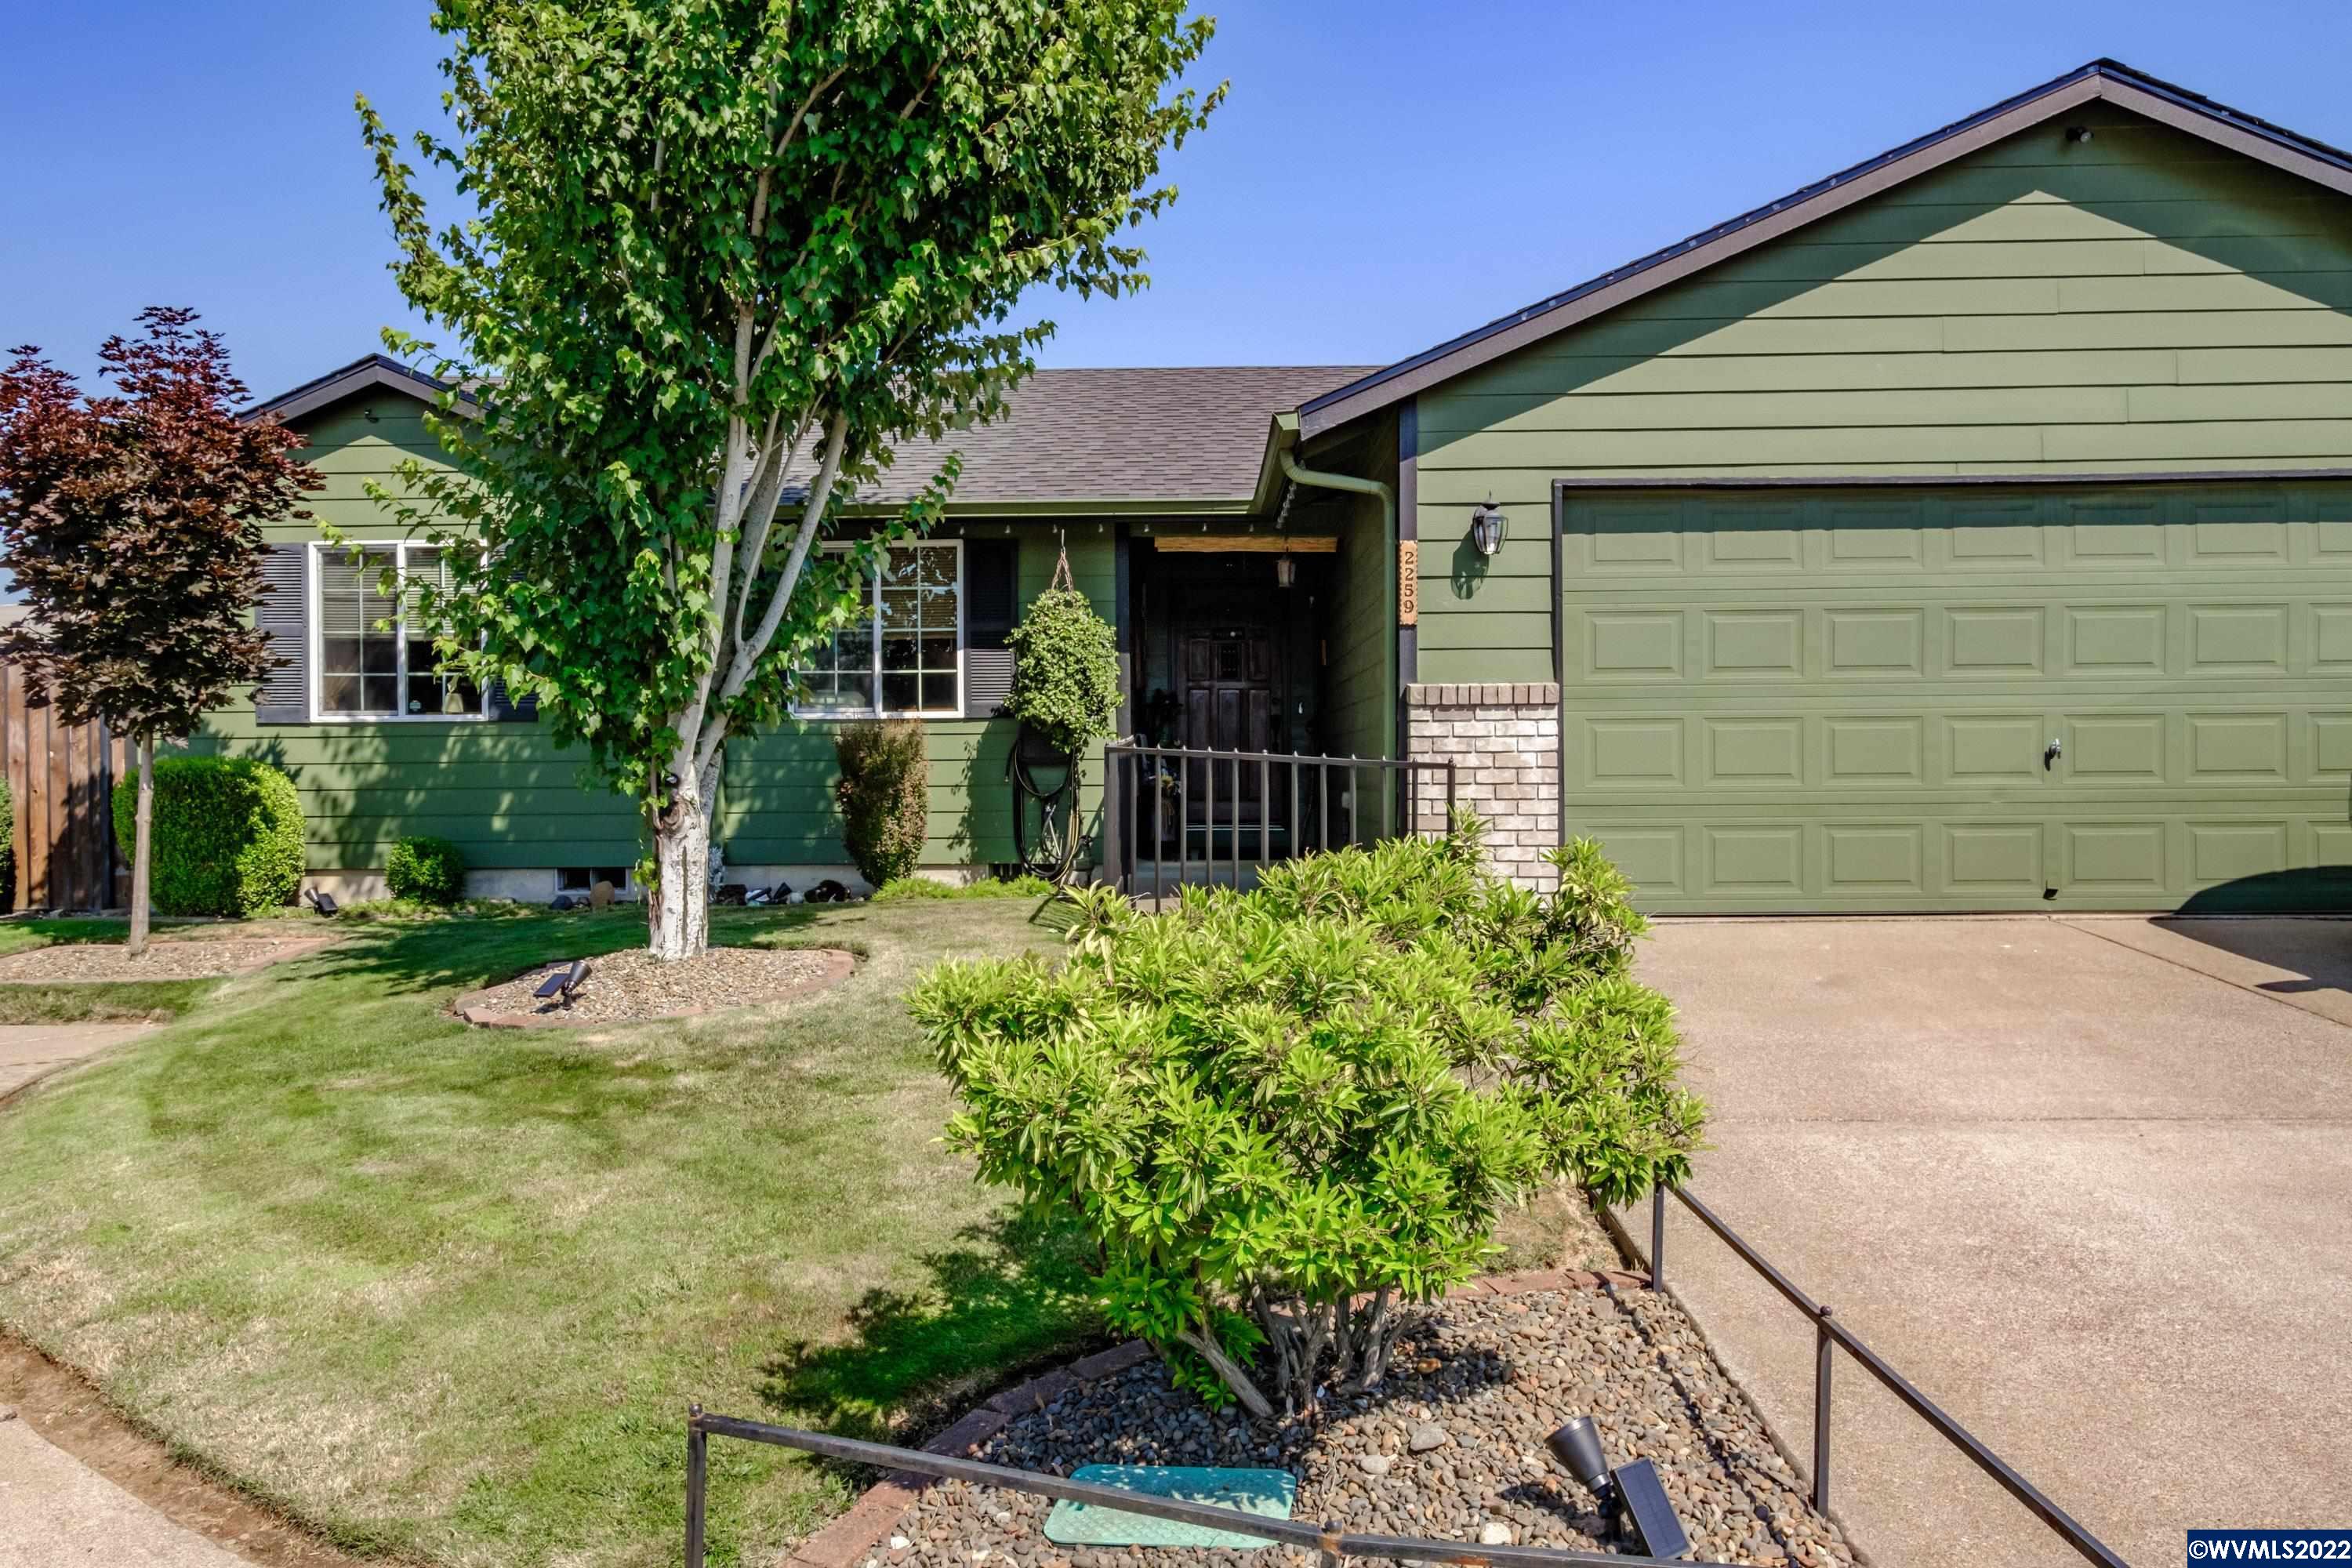 Charming 3 bed / 2 bath home on Cul-De-Sac! This move-in ready home offers an open living room, vaulted ceilings and primary suite with walk-in closet. Several updates including new roof in 2022 and new furnace/heat pump in 2019. Outside offer mature landscaping, beautiful covered patio, shed wired w/ 220 and RV pad! You don't want to miss this one, call today!